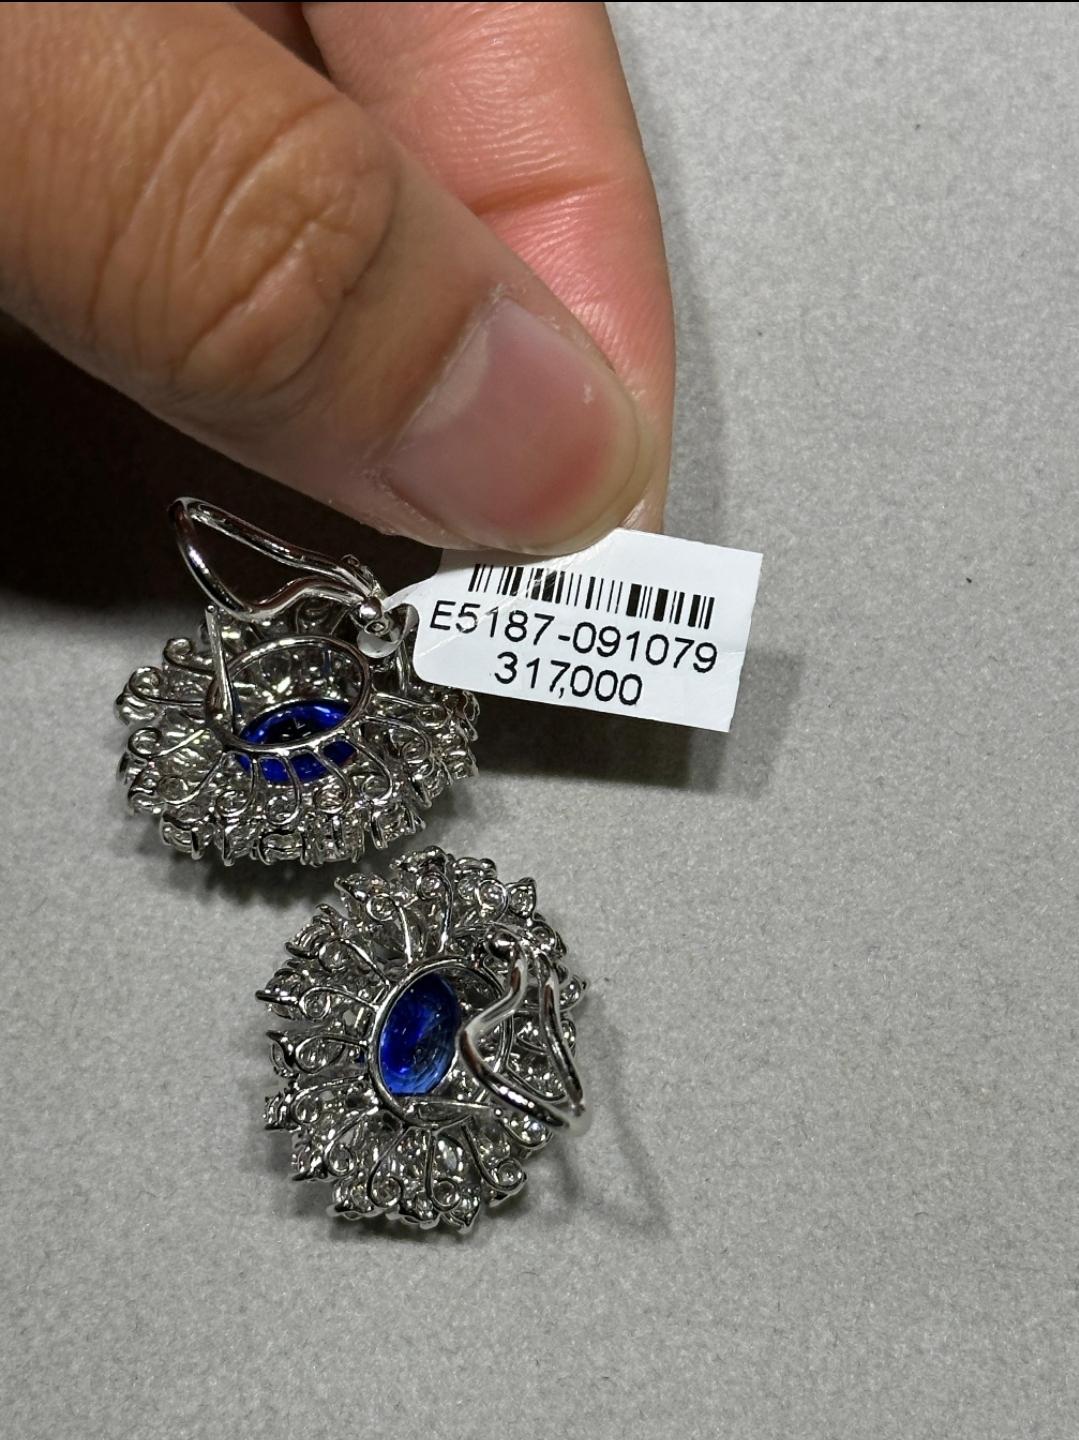 NWT $317, 000 18KT Gold Rare Gorgeous 18CT Blue Sapphire Diamond Earrings For Sale 1